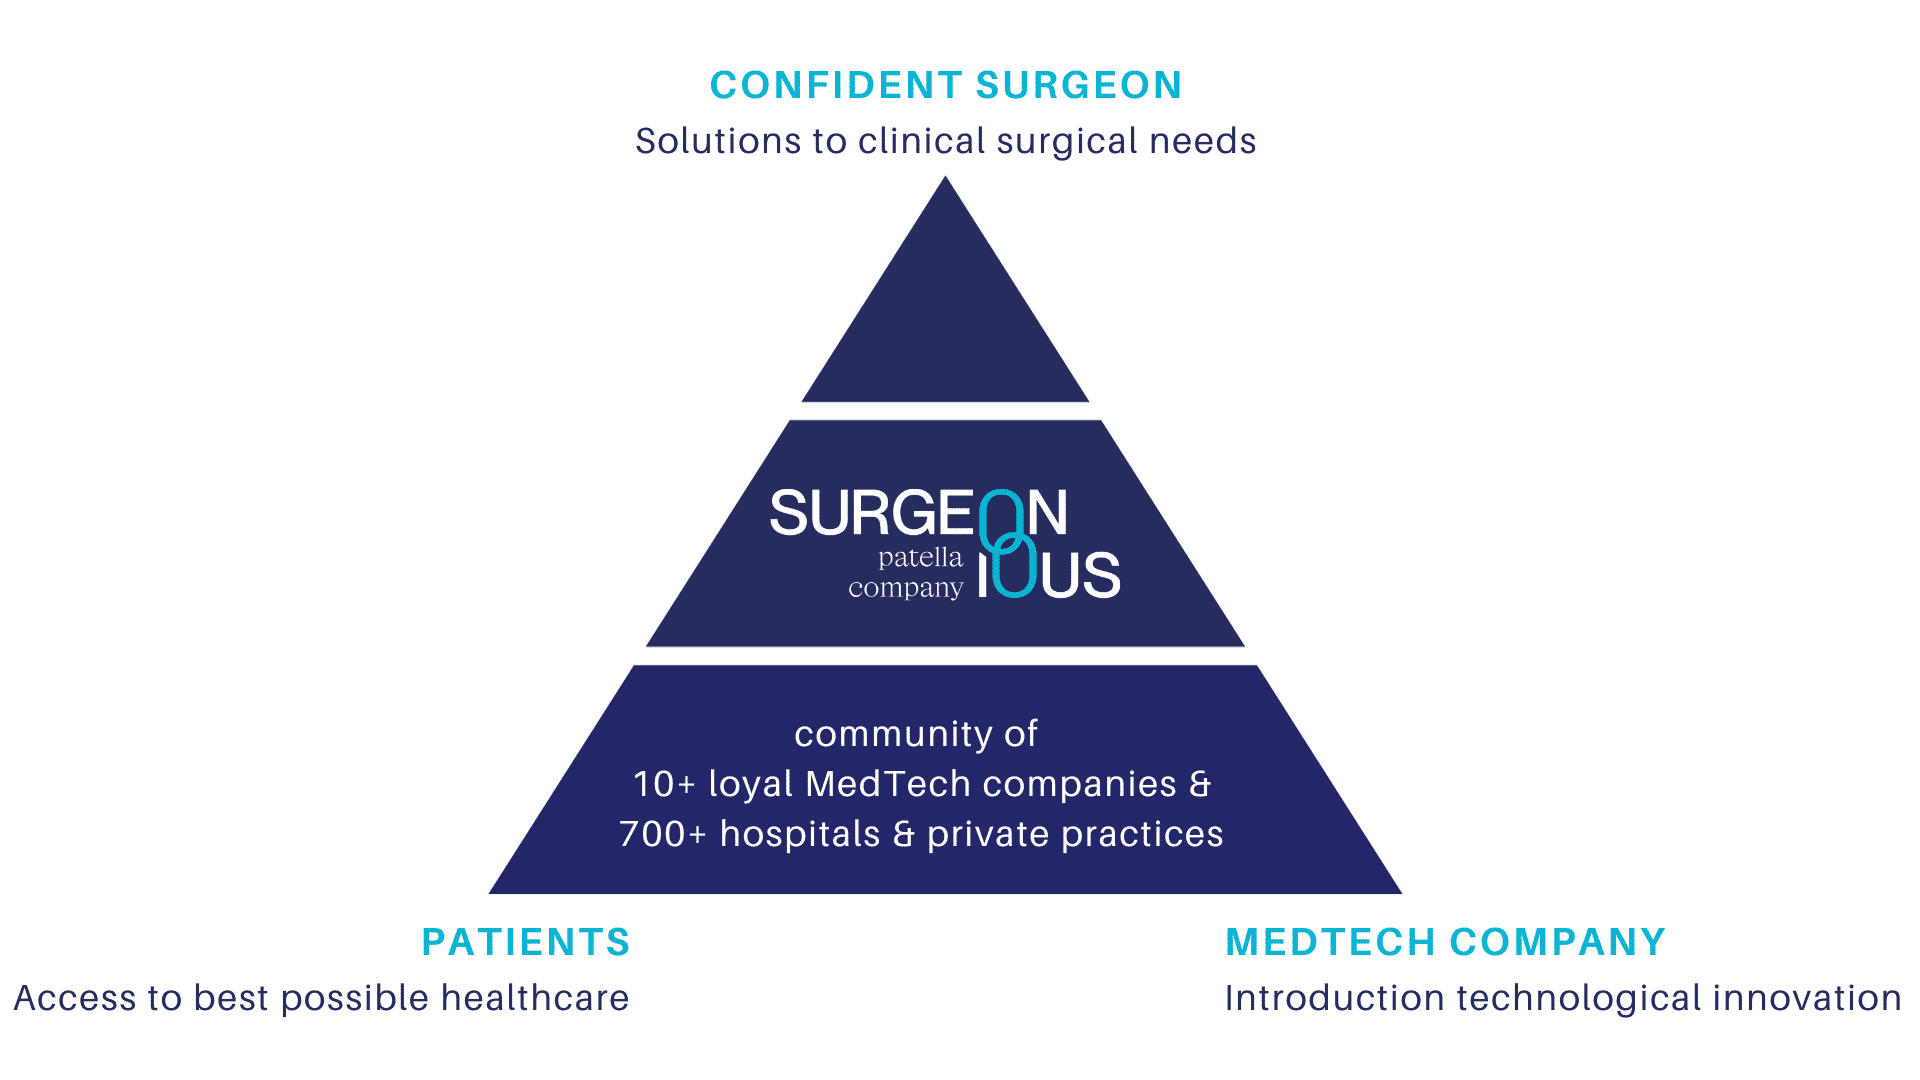 the Surgeonious company culture with surgeons, patients and medtech companies